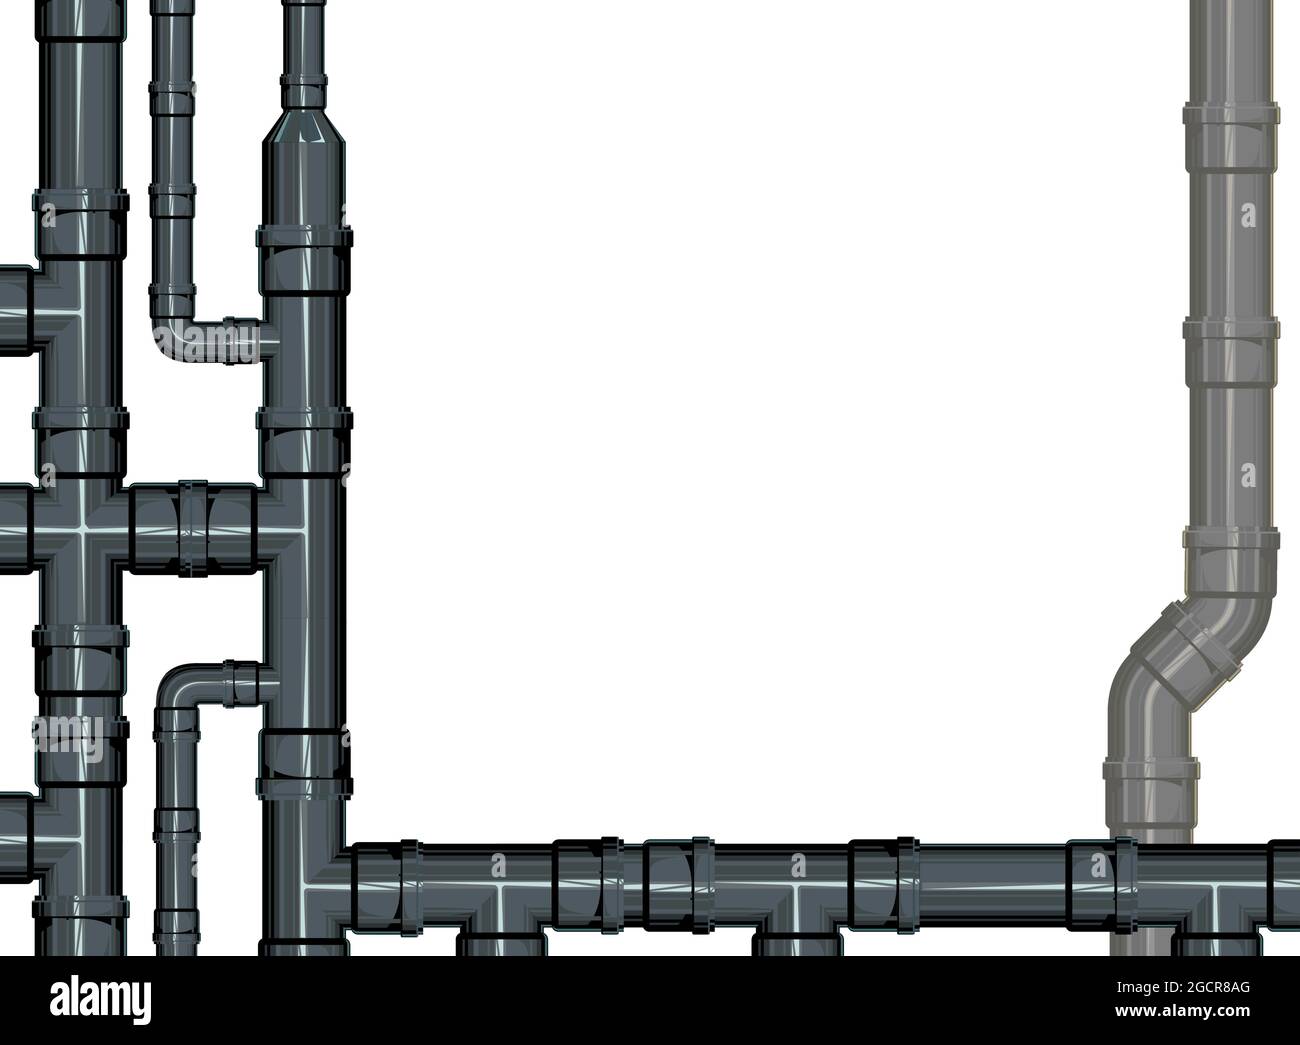 Sewer. Water fittings. Pipeline for various purposes. Frame with place for text. Illustration isolated on background vector. Stock Vector